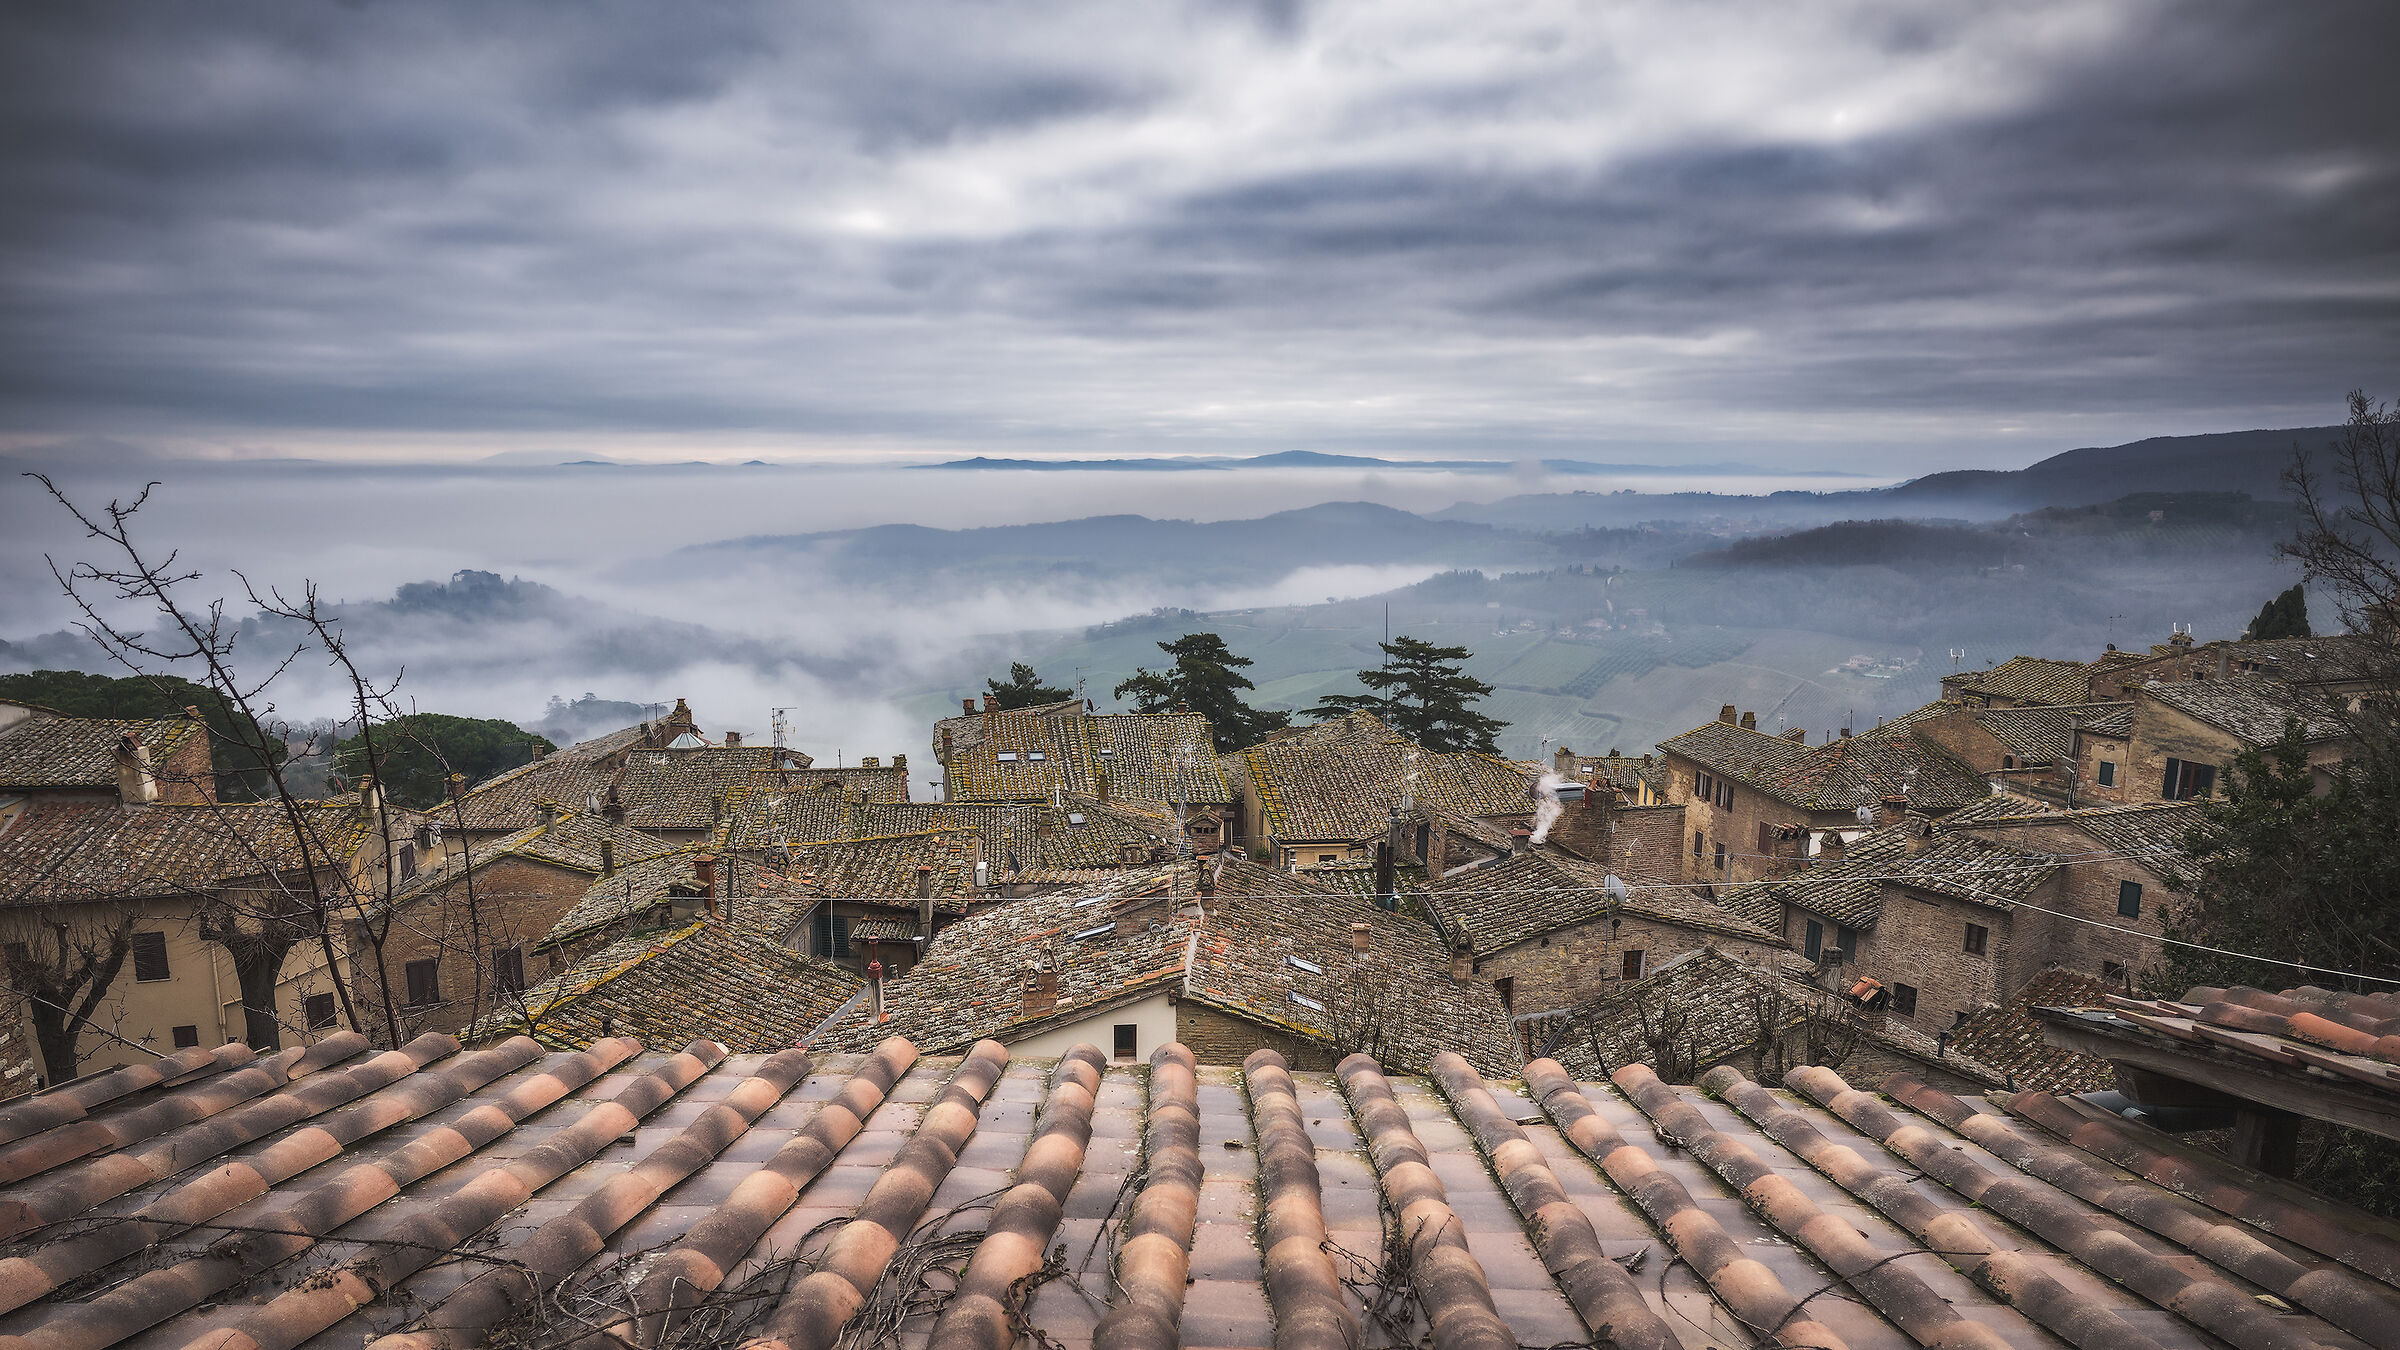 Roofs and Mists...